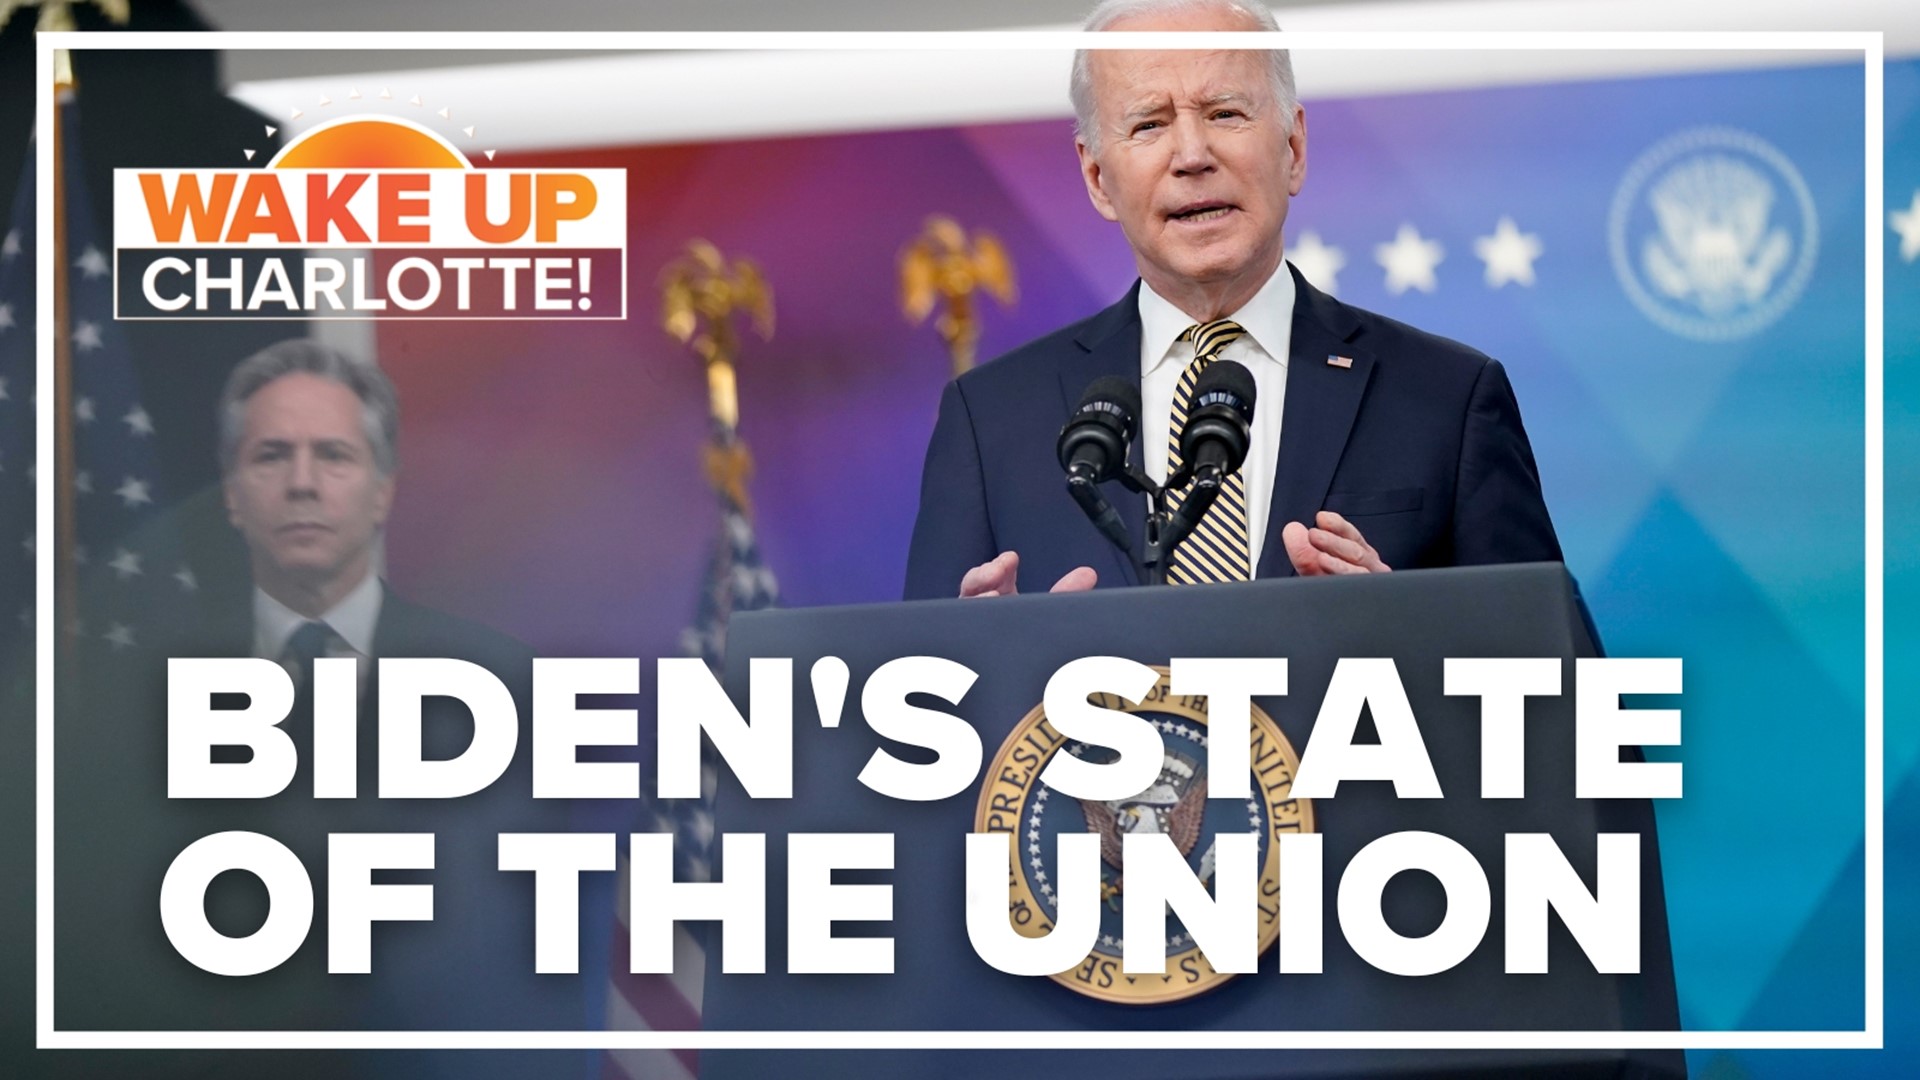 Rather than roll out new policy proposals, Biden is ready to offer Americans a reassuring assessment of the nation's condition in a time of economic uncertainty.